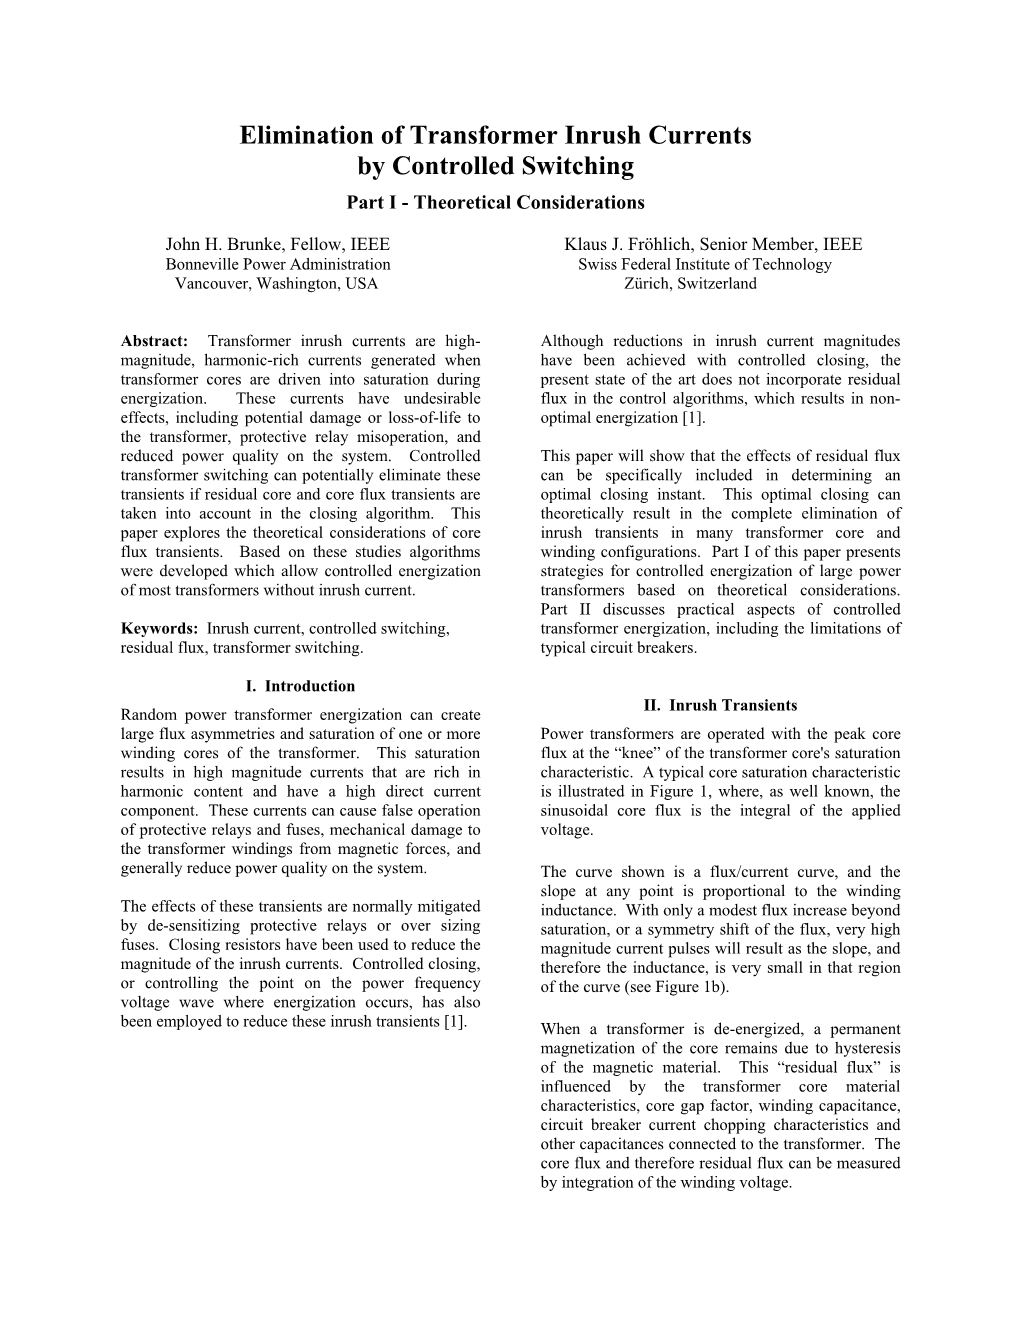 Elimination of Transformer Inrush Currents by Controlled Switching Part I - Theoretical Considerations